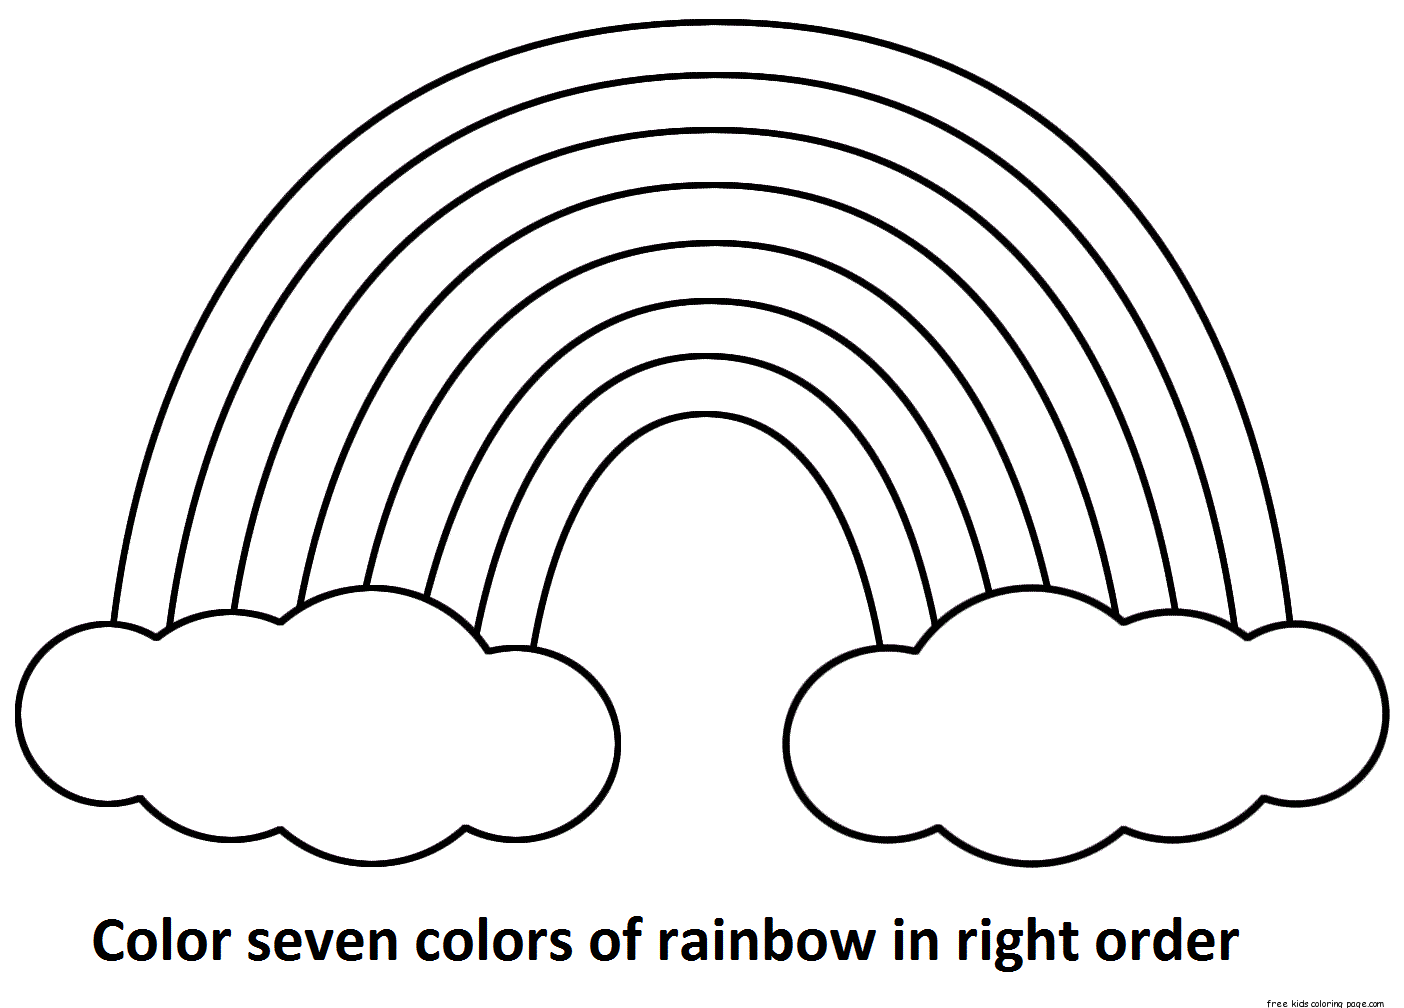 Printable seven rainbow colors.Fill right rainbow colors in sheet.activity for learning.